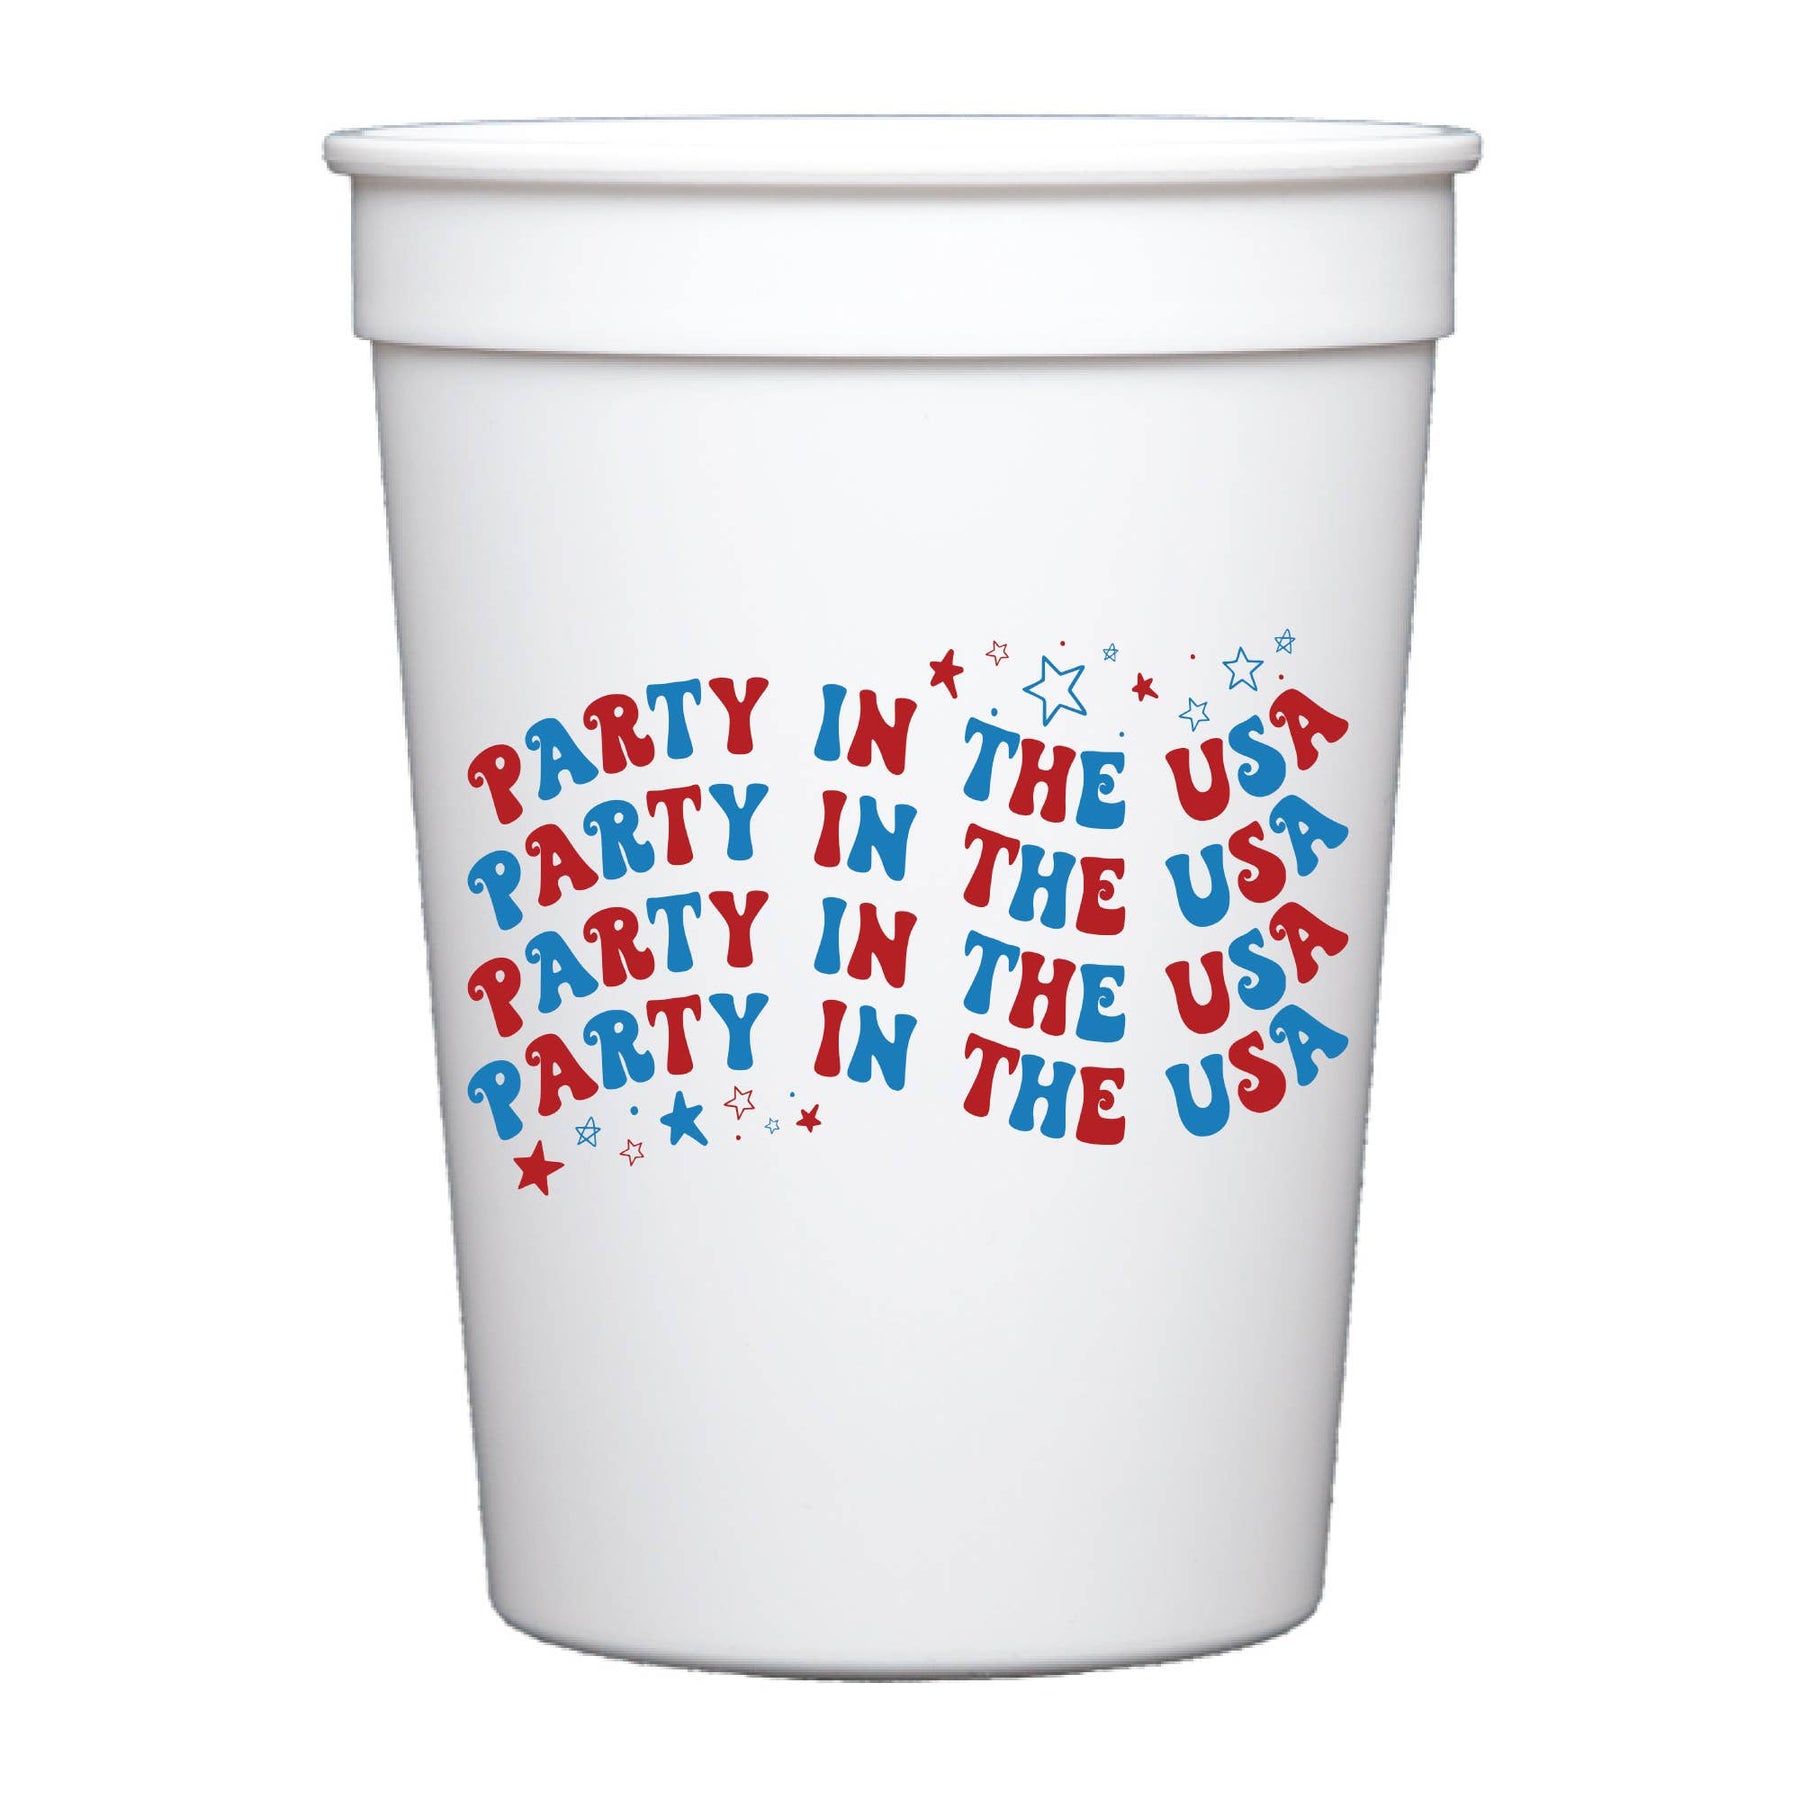 Party In The USA Repeating White Stadium Cup - Patriotic